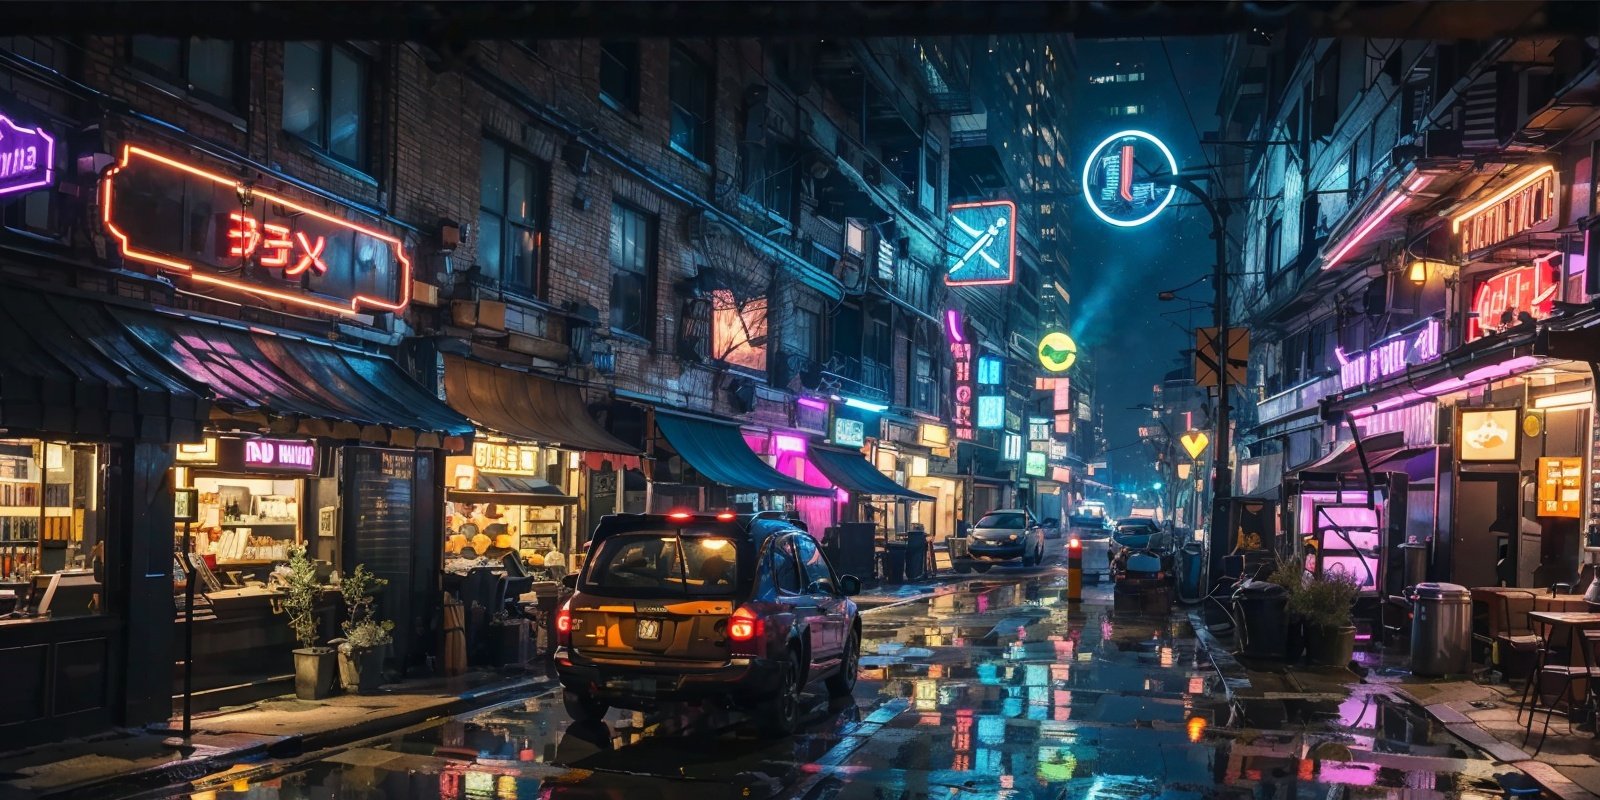 (masterpiece:1.2), best quality,fantasy,letterboxed, scenery, neon lights, outdoors, city, sign, building, night, ground vehicle <lora:UE_20230717224732-000003:0.6>